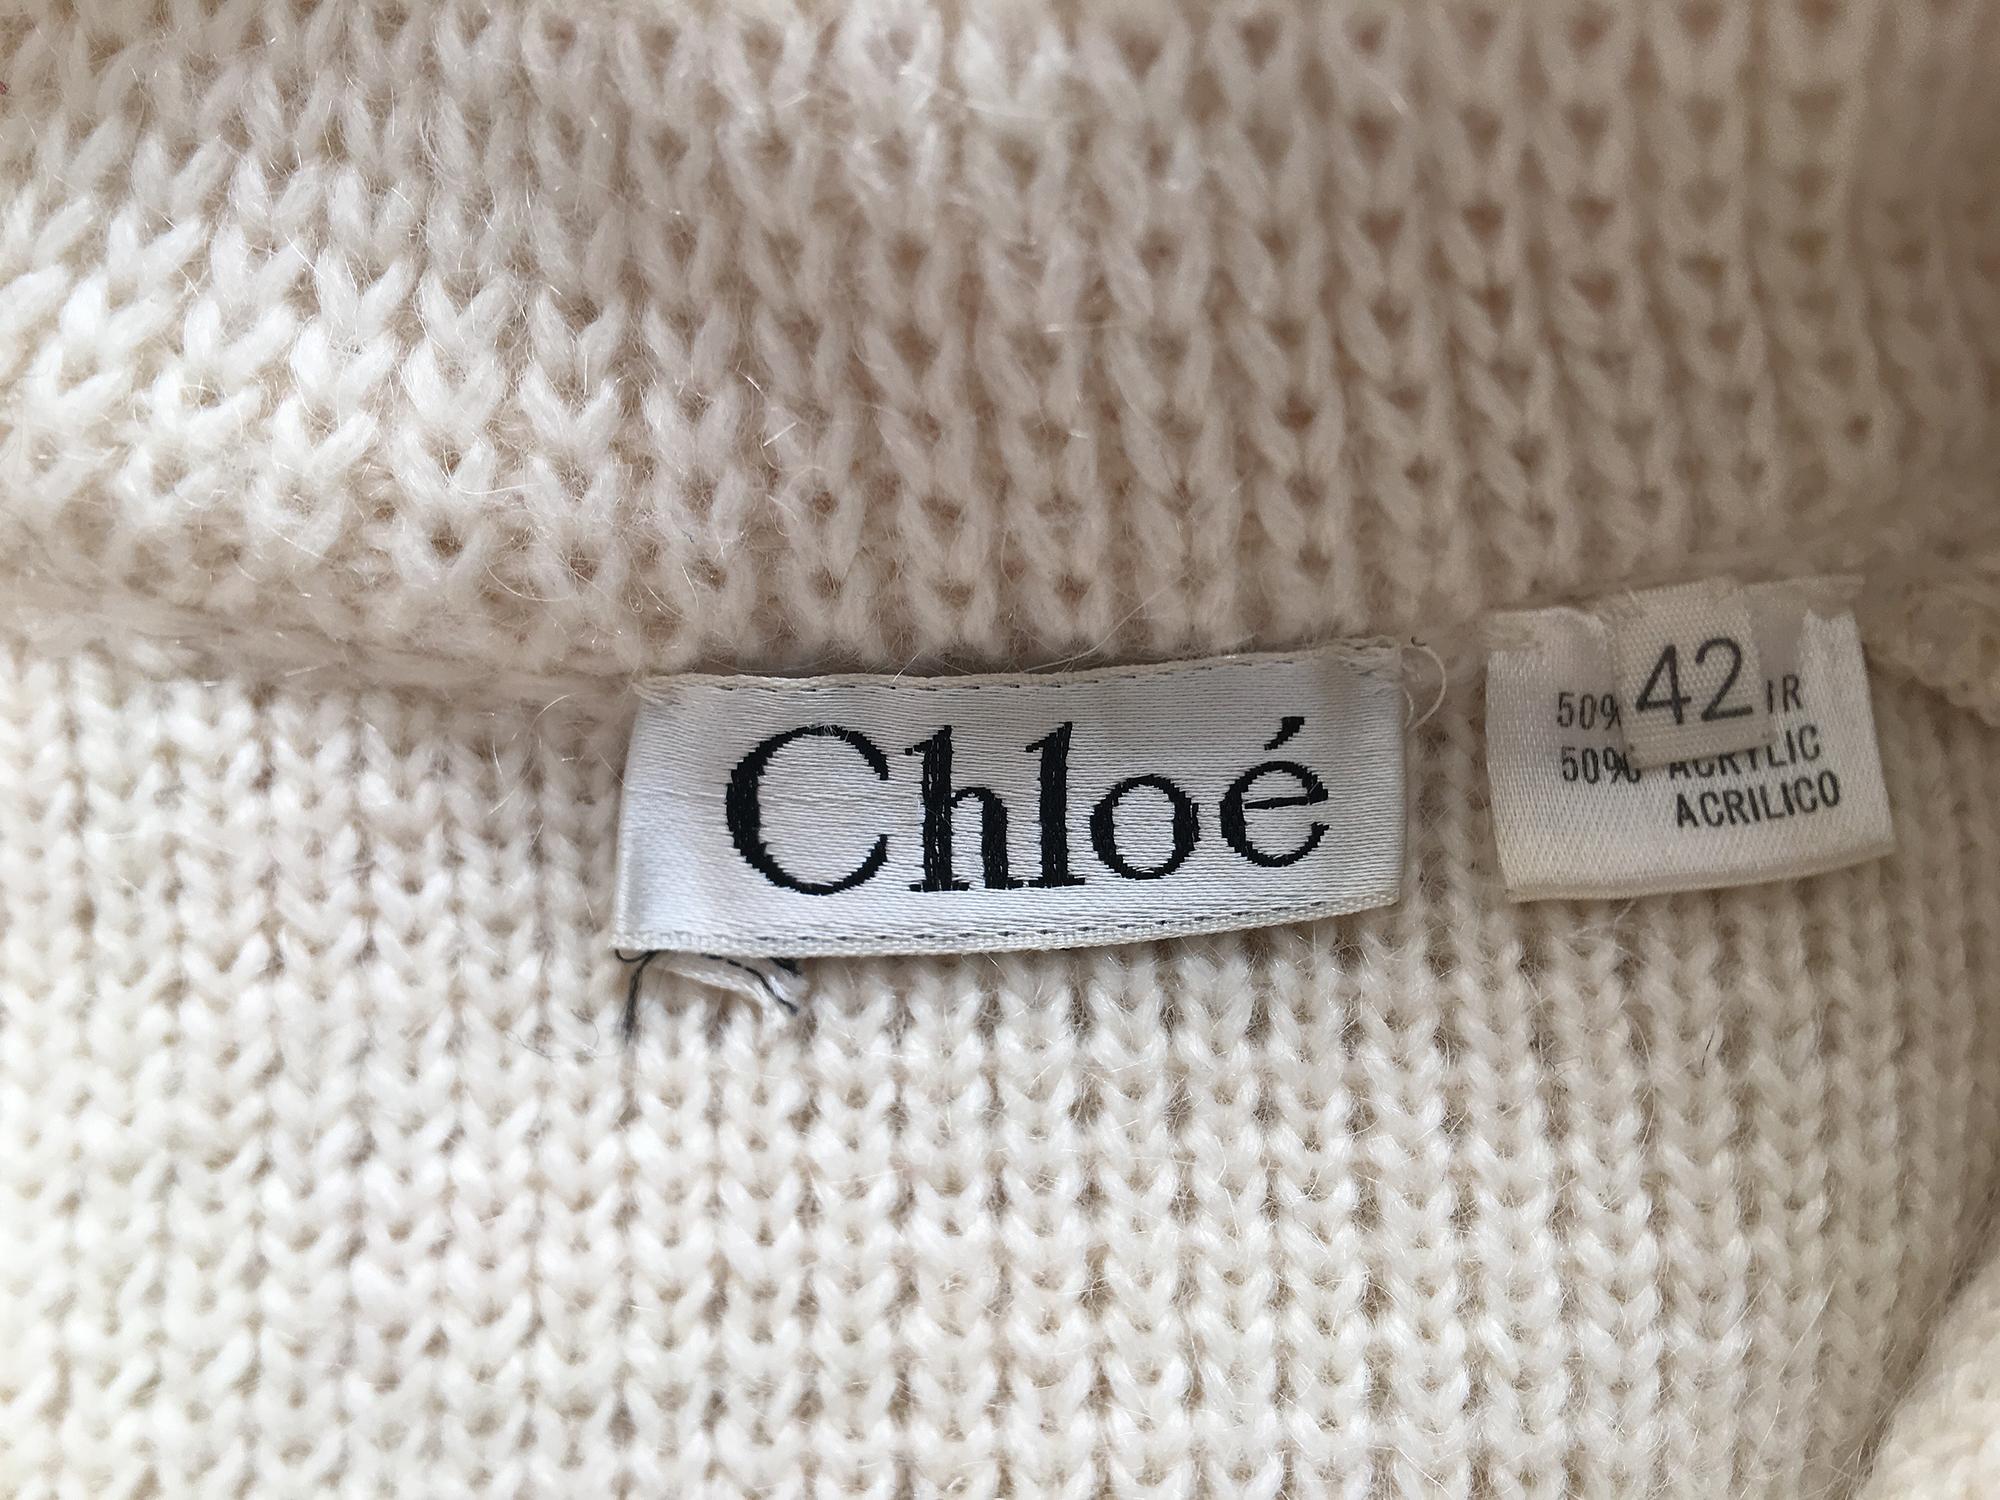 Women's Chloe Hand-knit Ivory Cardigan  Sweater 1980's EX++ For Sale